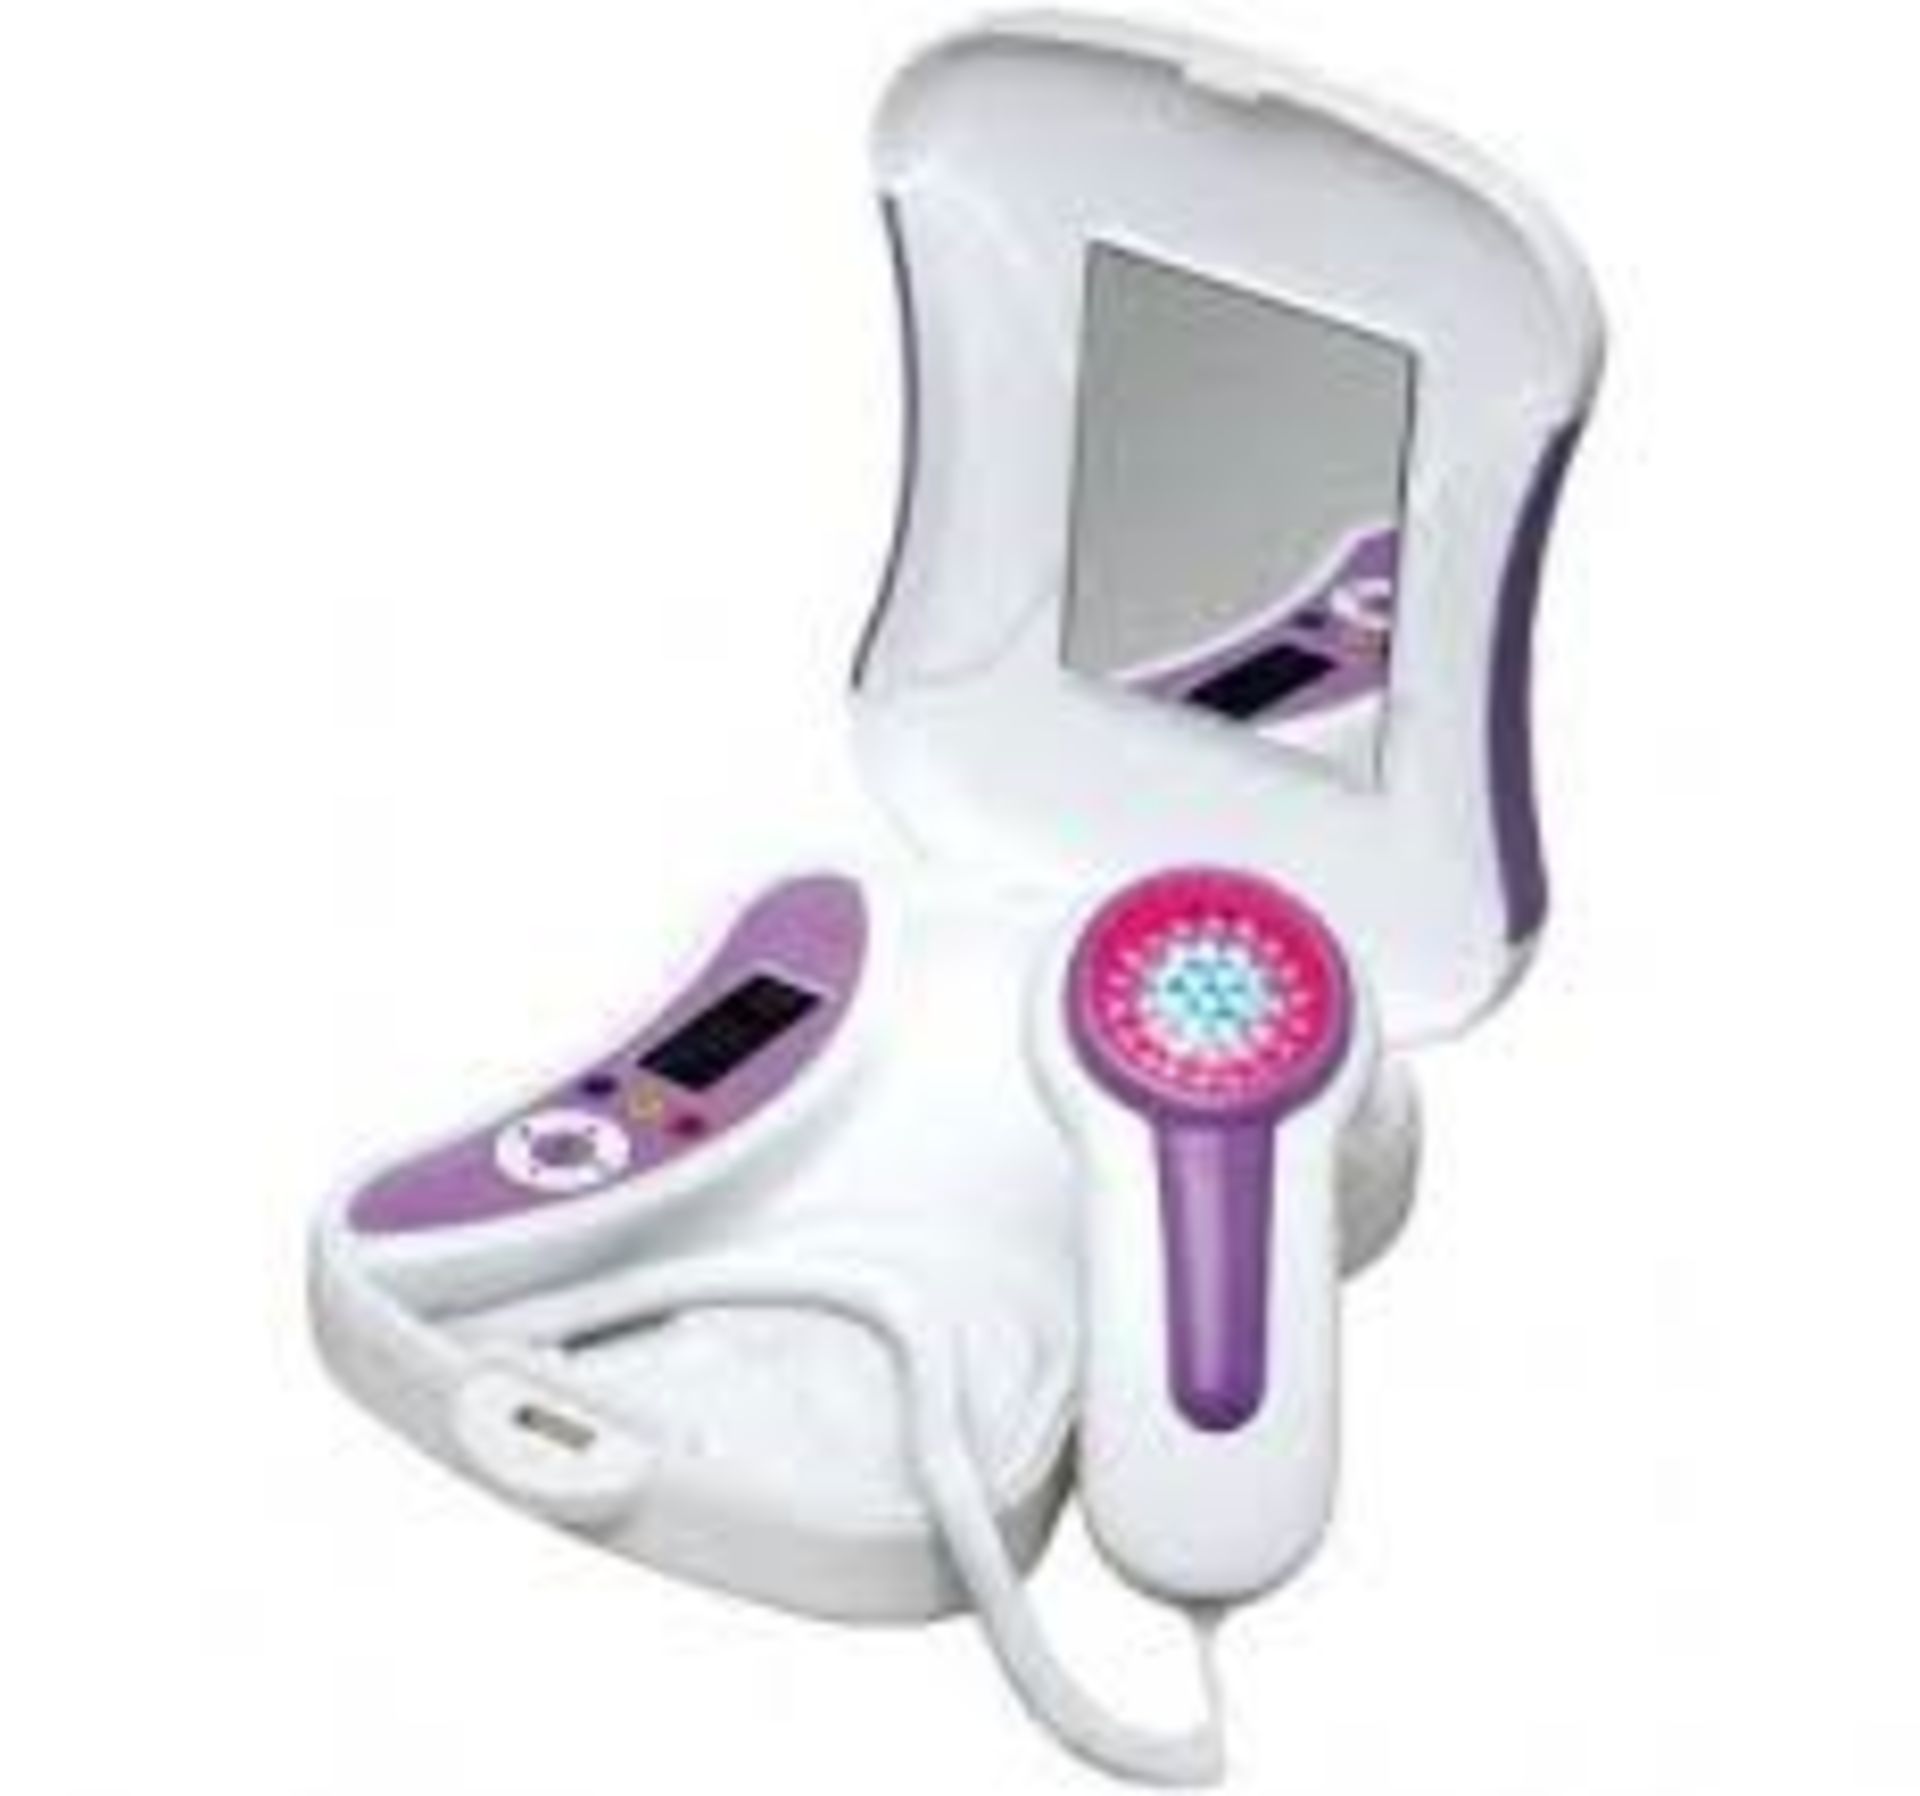 1 AS NEW BOXED BEAUTYLITE BL 100 FACIAL LIGHT THERAPY / RRP £79.99 (VIEWING HIGHLY RECOMMENDED)